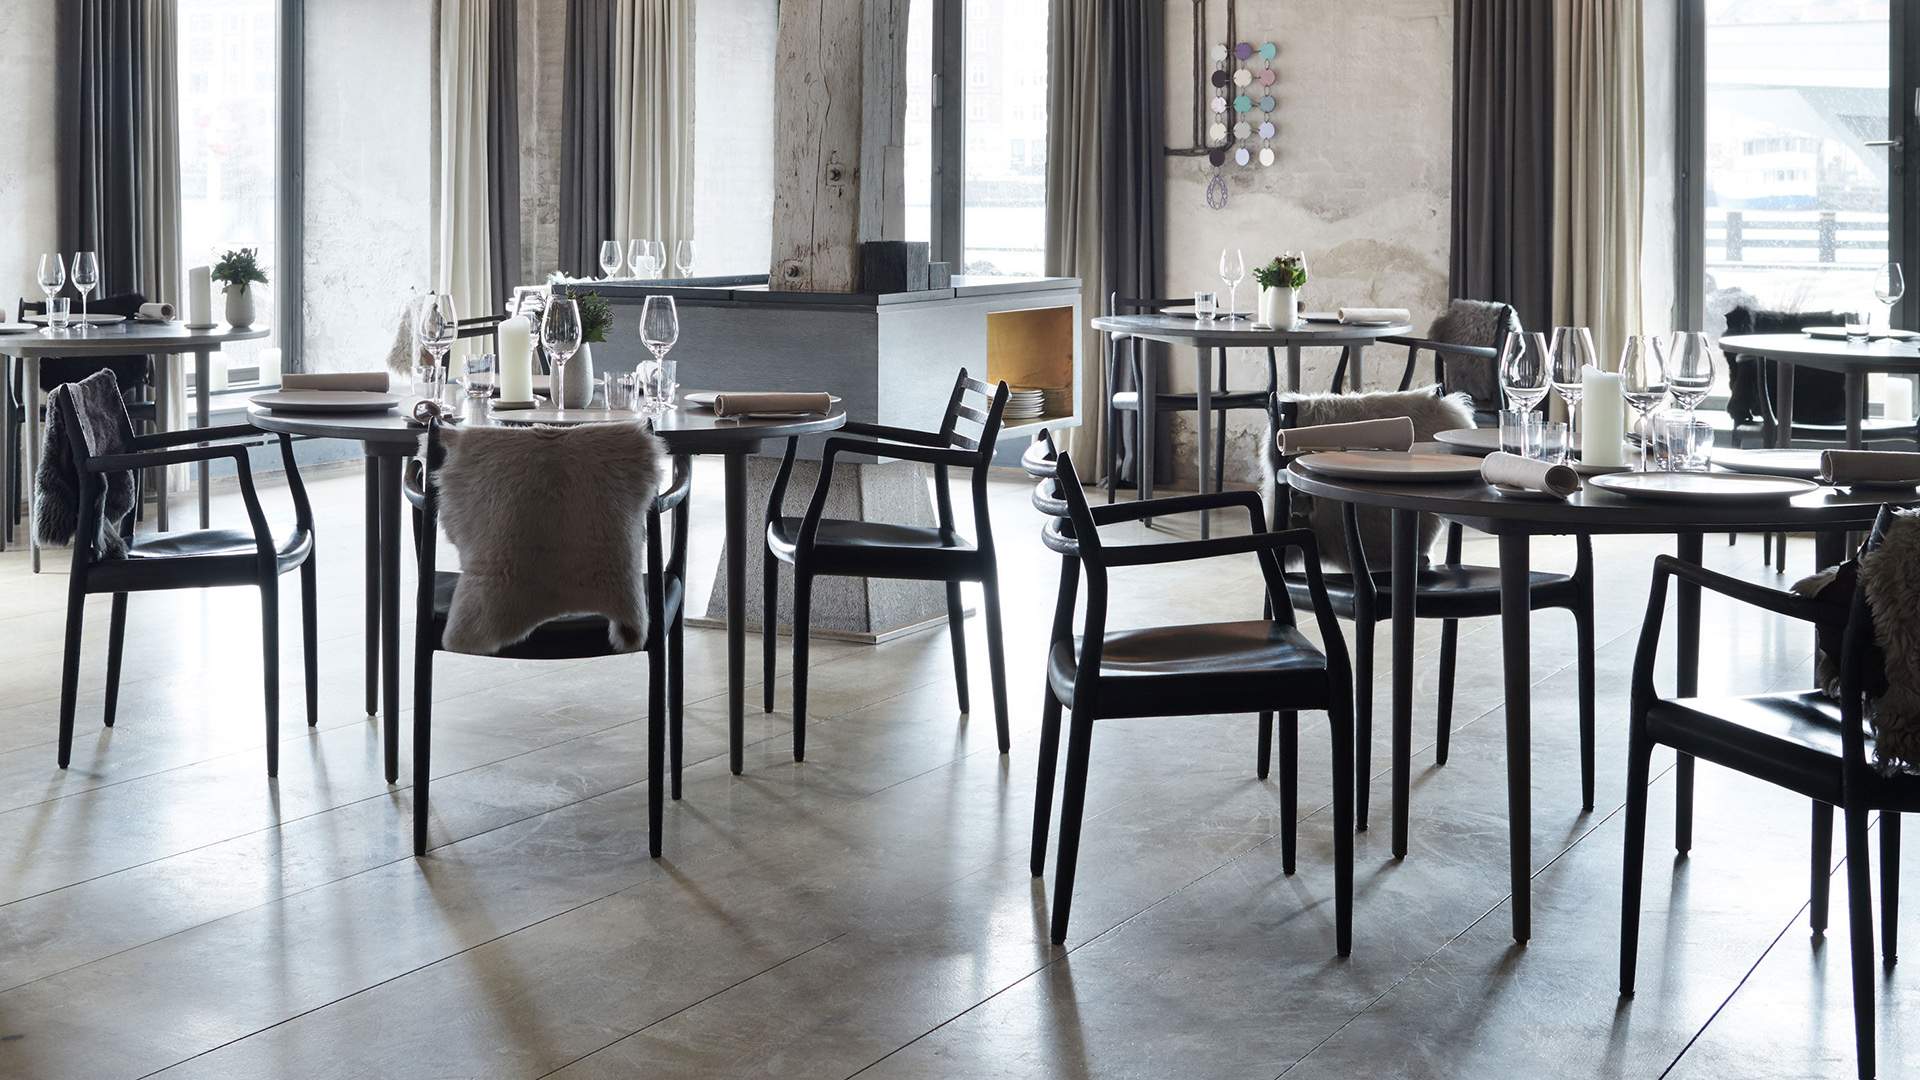 You Can Own a Piece of Noma's Luxe Scandinavian Decor